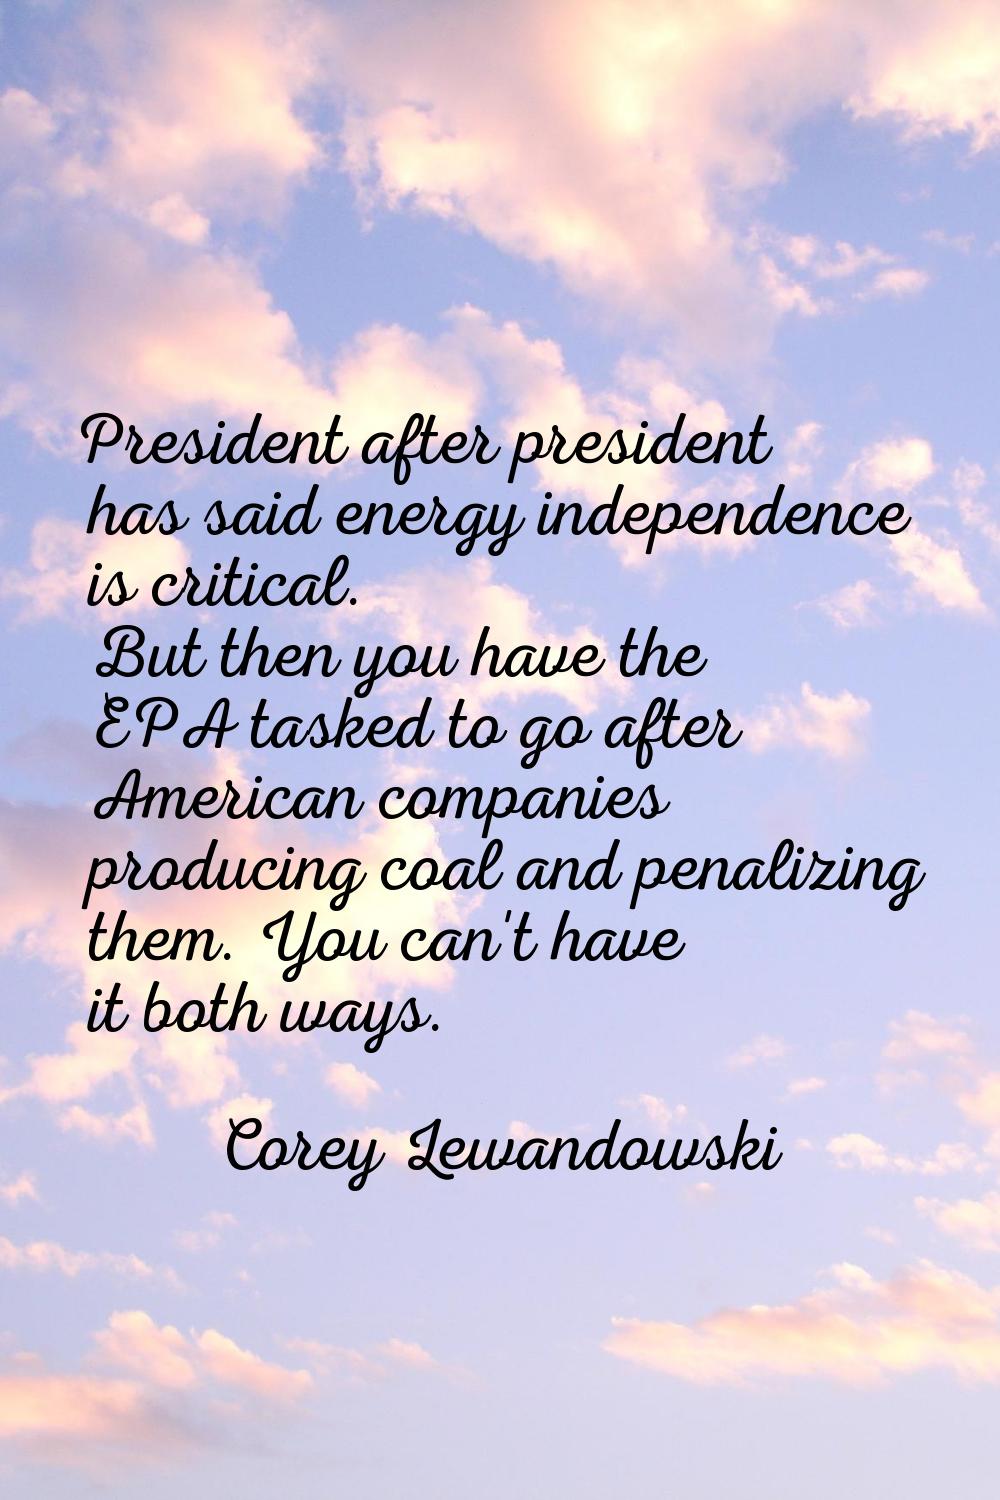 President after president has said energy independence is critical. But then you have the EPA taske